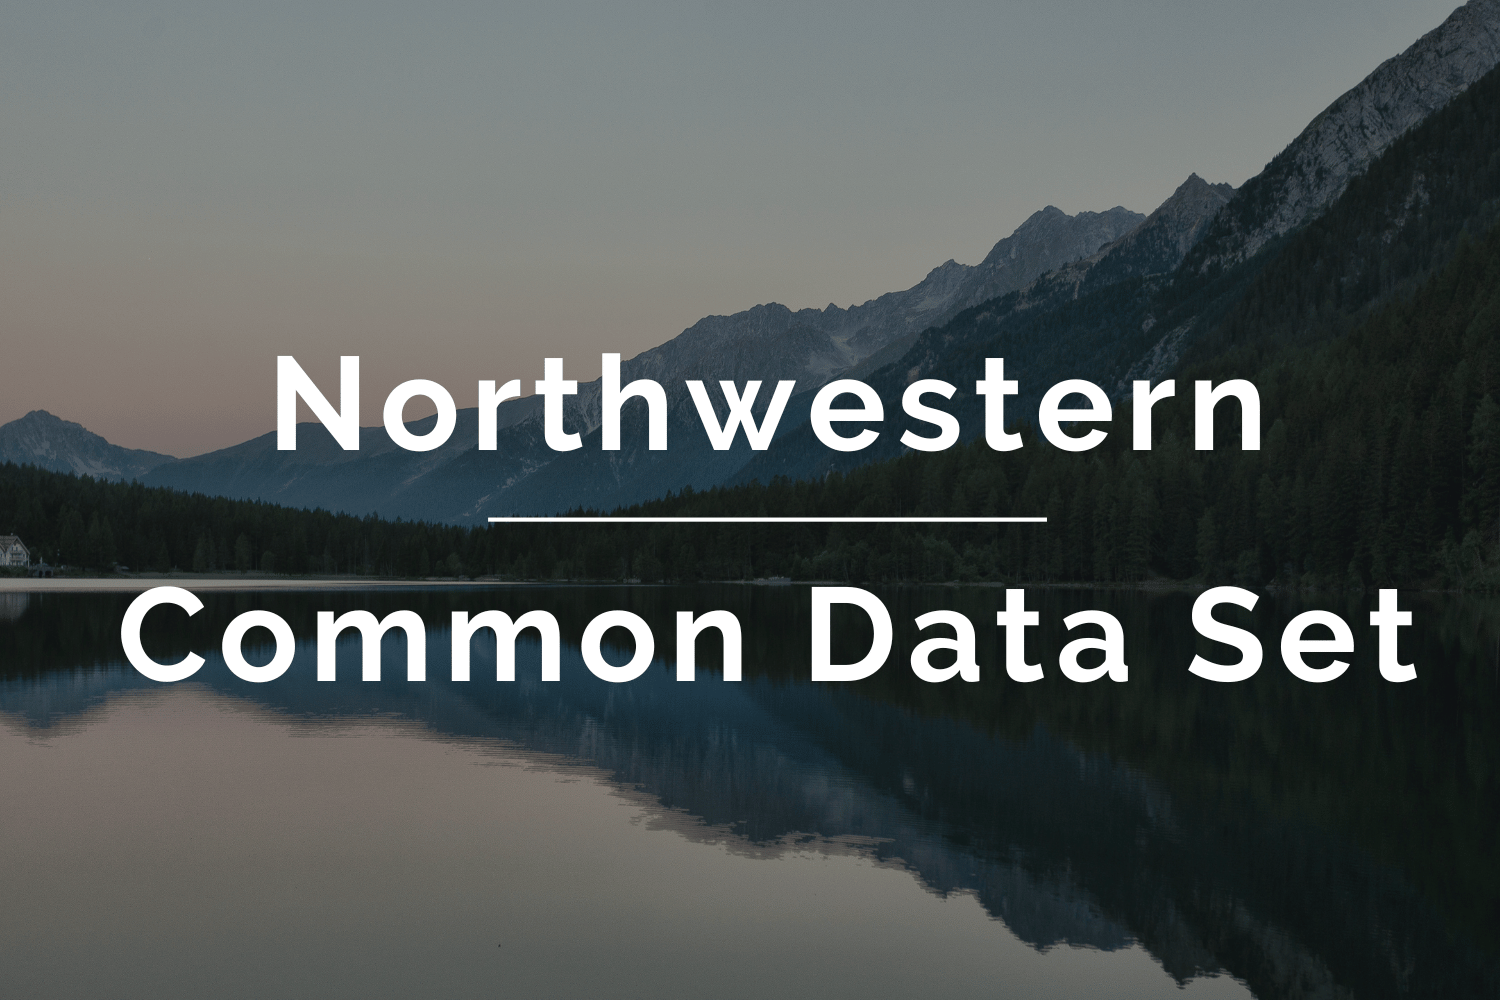 How to Use the Northwestern Common Data Set